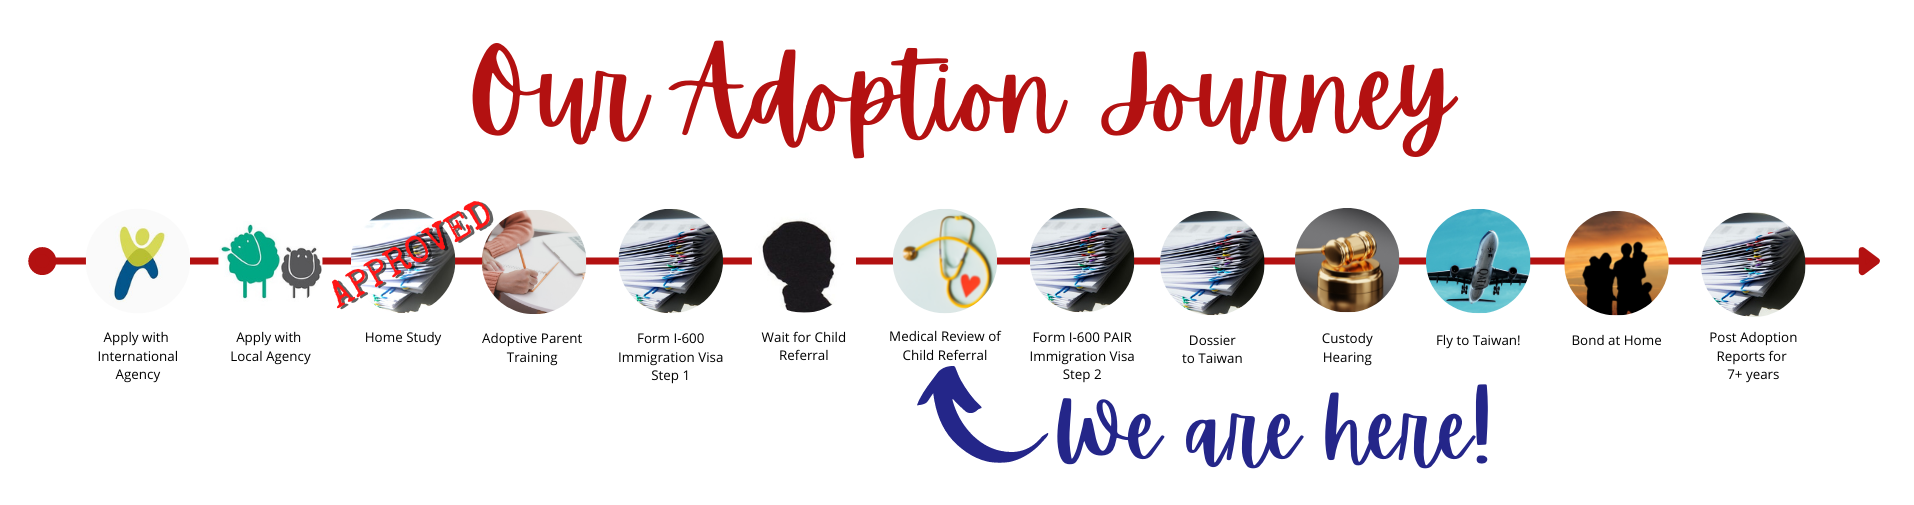 Our Adoption Journey: We are here! Arrow pointing to 